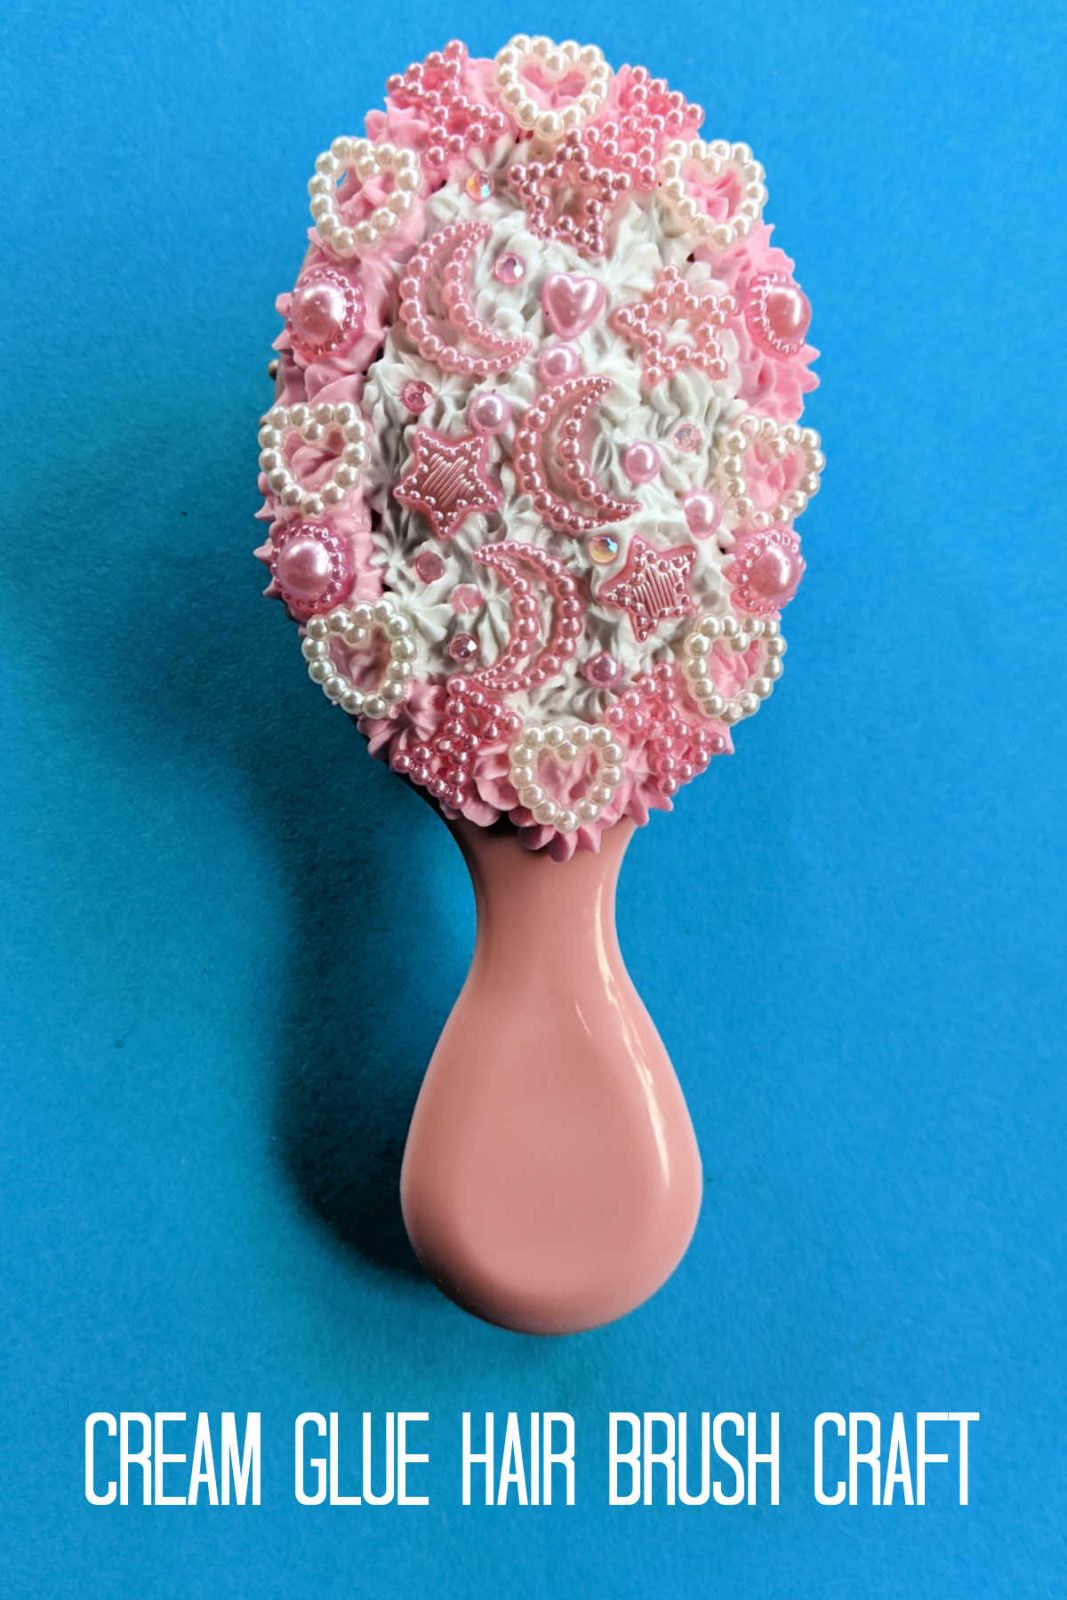 Every princess needs the perfect hair brush, so create your own with this easy and sparkly decoden pink princess hair brush craft! Fun for kids and adults alike, this craft uses whipped cream glue, pearls, and rhinestones to transform an ordinary hair brush into a fit-for-royalty masterpiece! Makes a great gift too!